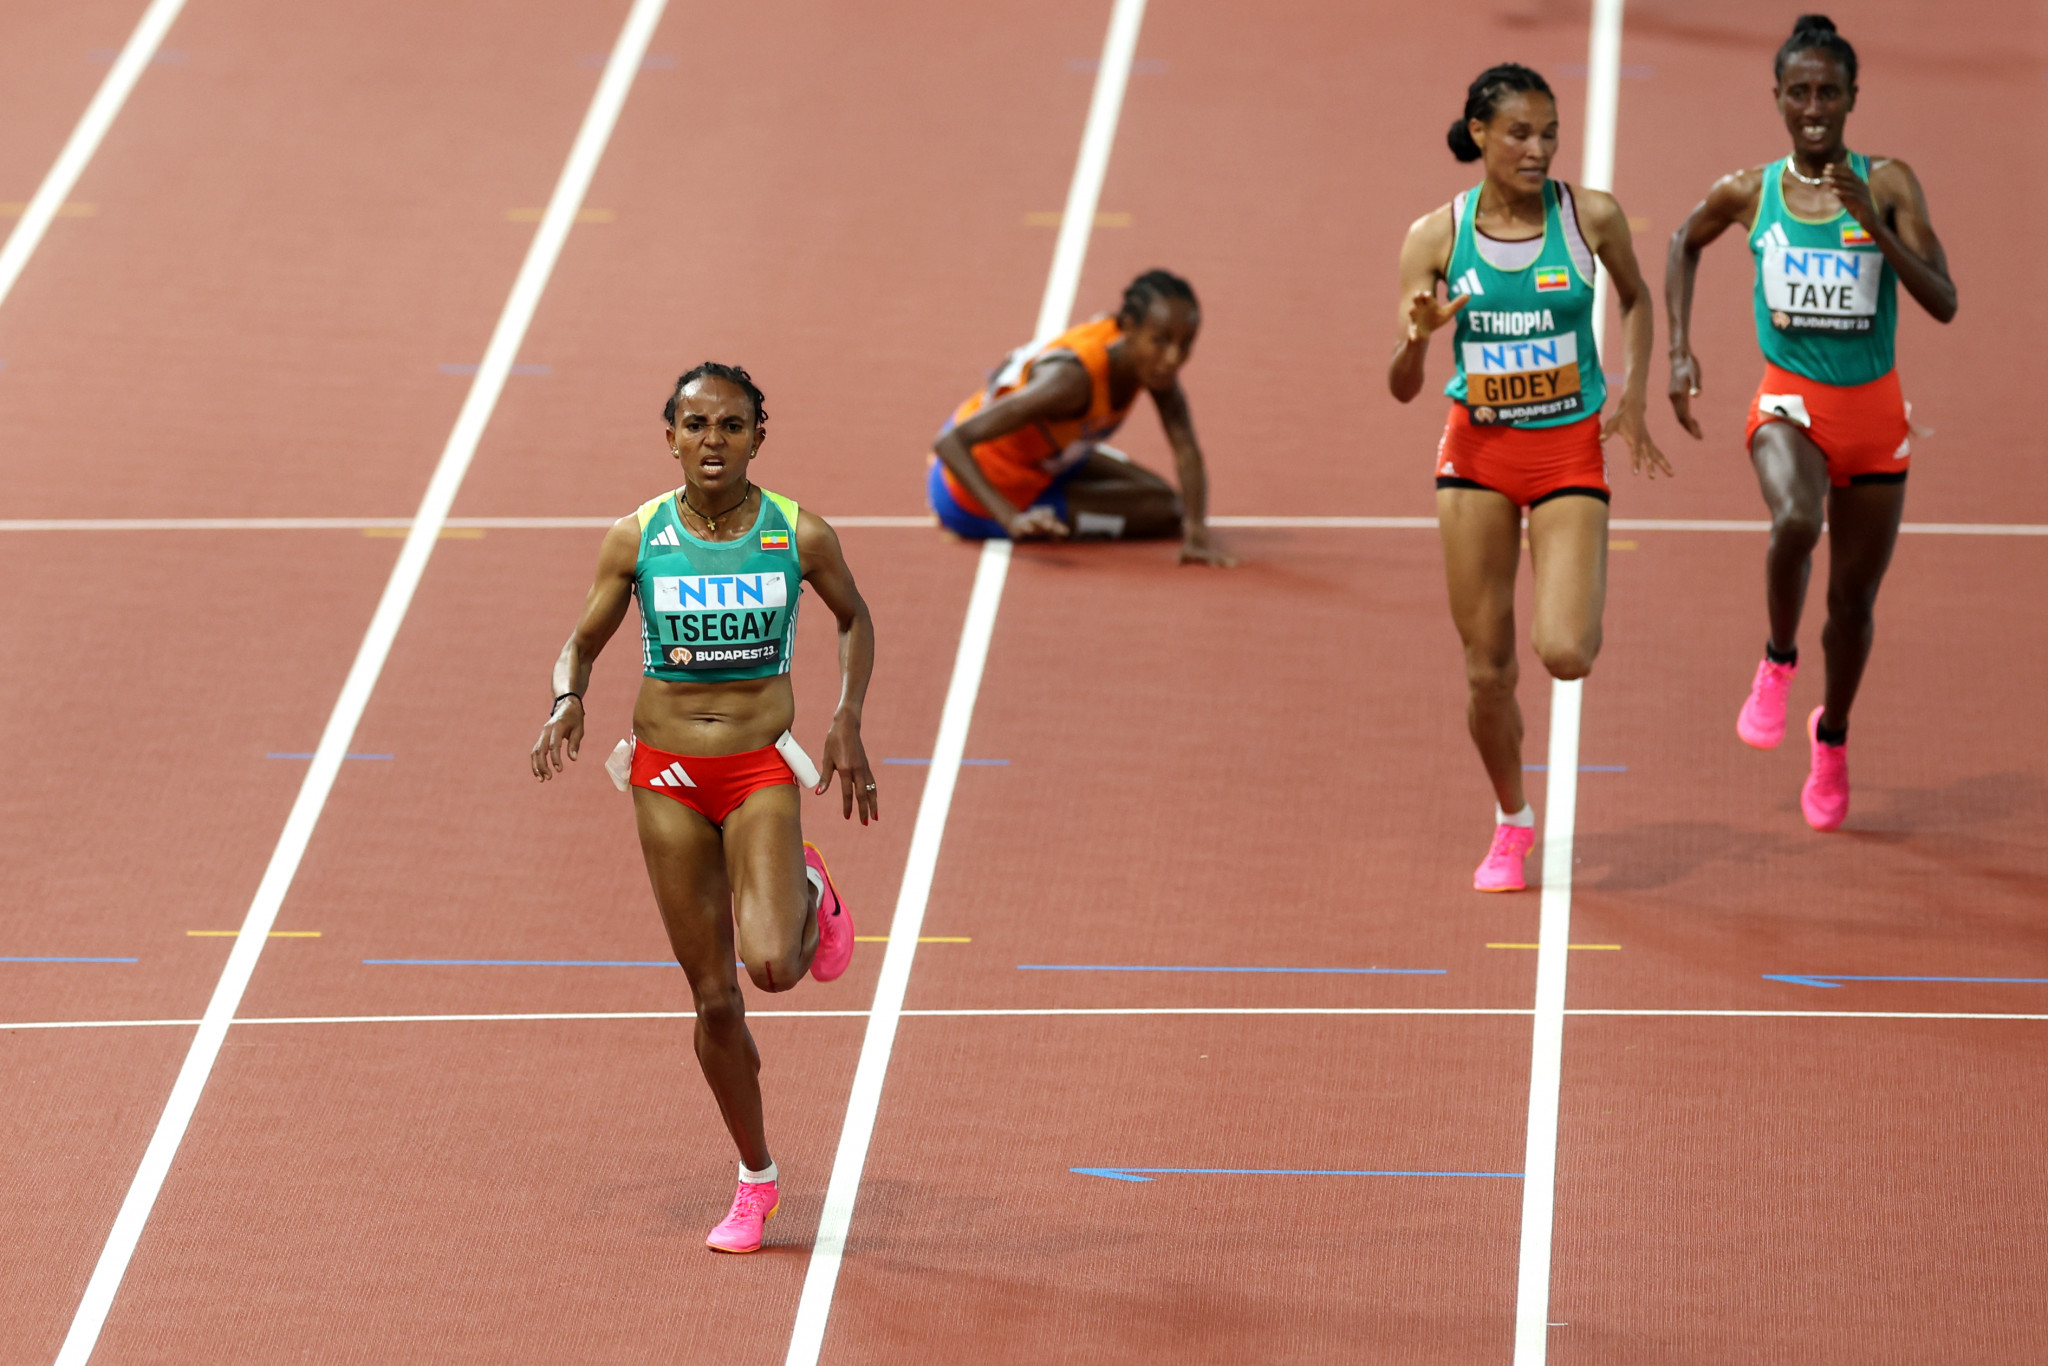 Gudaf Tsegay, left, led an Ethiopian women's 10,000m one-two-three with second-placed Letesenbet Gidey, second right, and third-placed Ejgayehu Taye, right, after an unfortunate fall by The Netherlands' Sifan Hassan, second left ©Getty Images